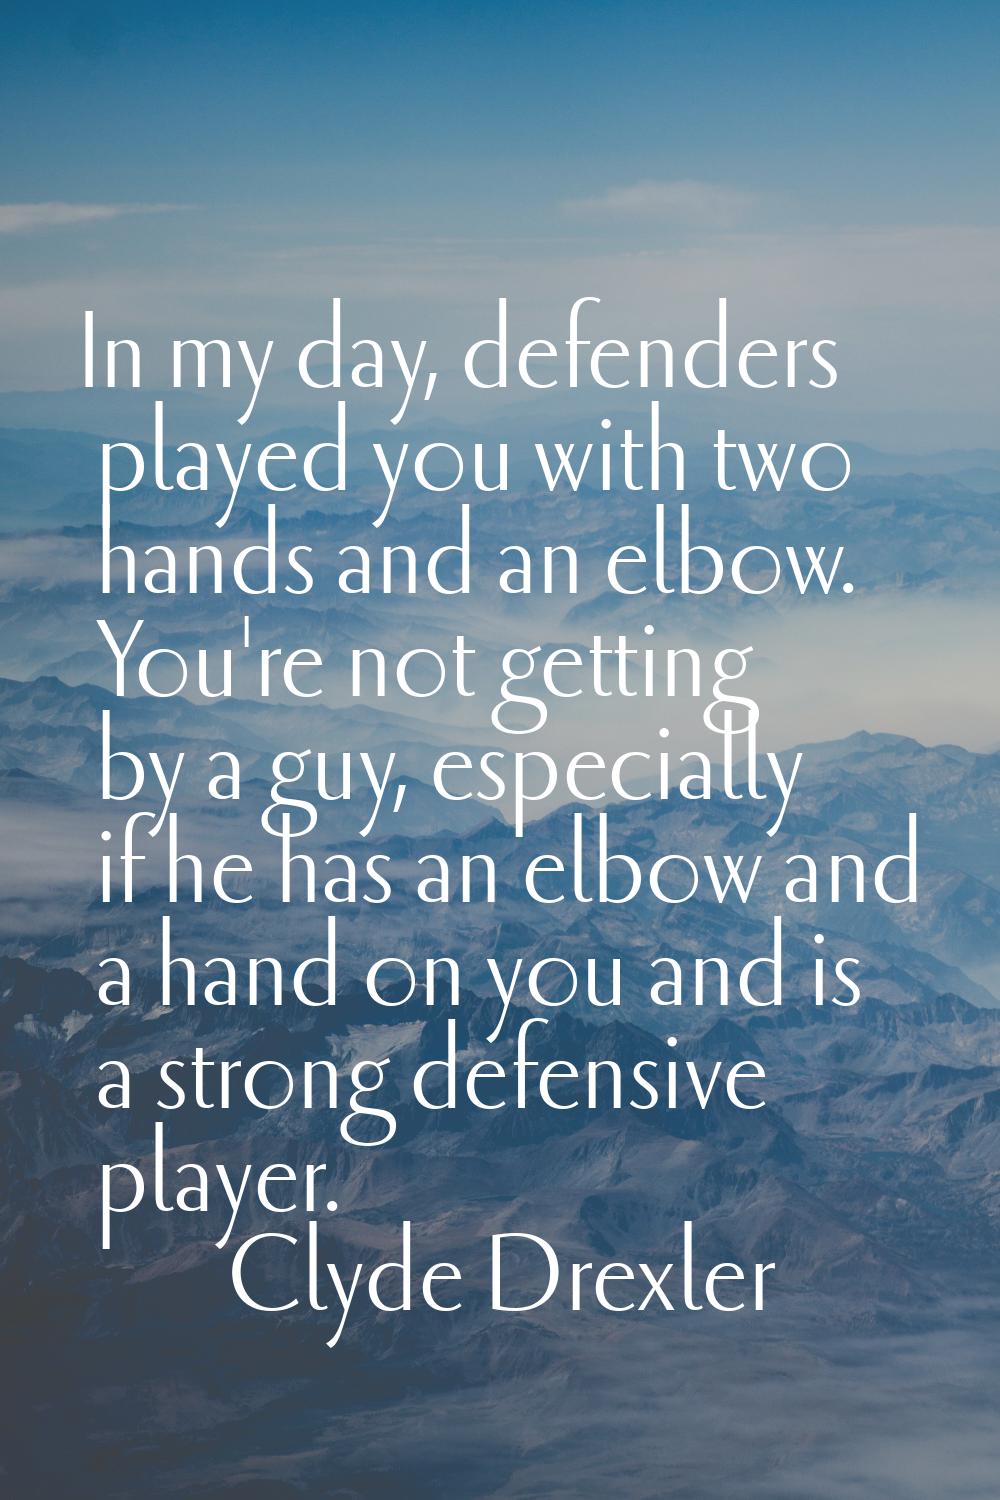 In my day, defenders played you with two hands and an elbow. You're not getting by a guy, especiall